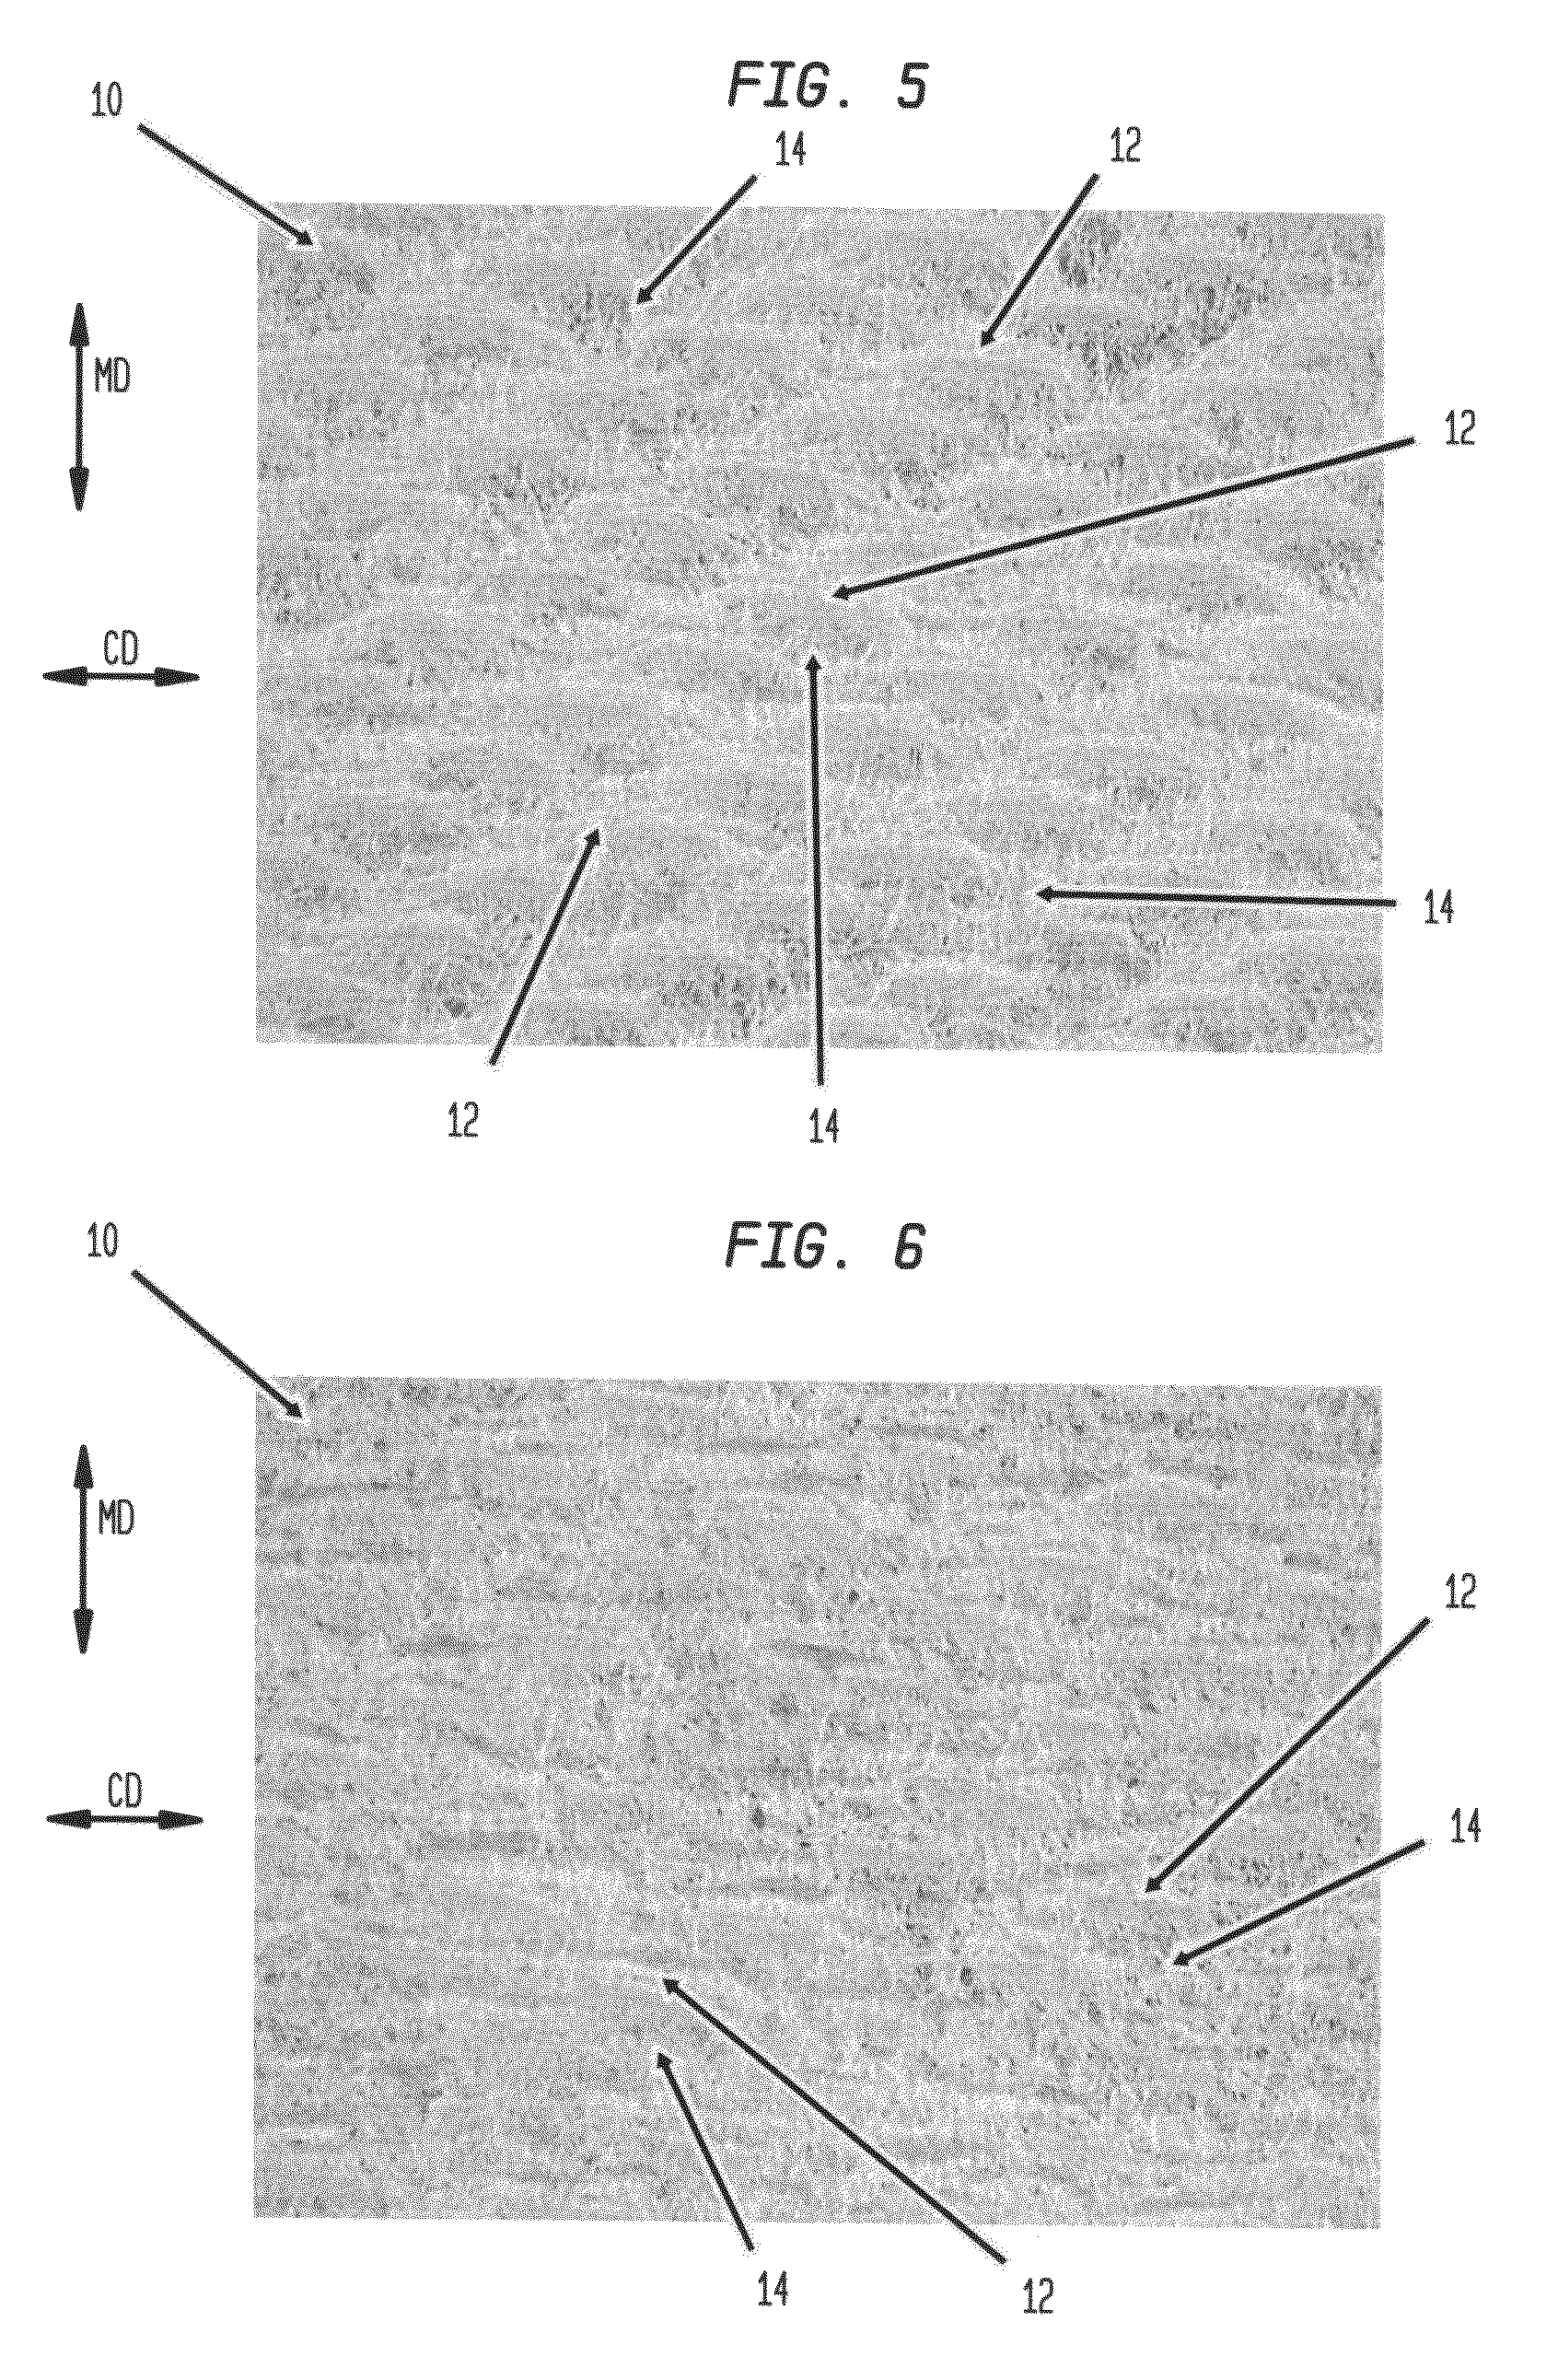 Fabric crepe/draw process for producing absorbent sheet